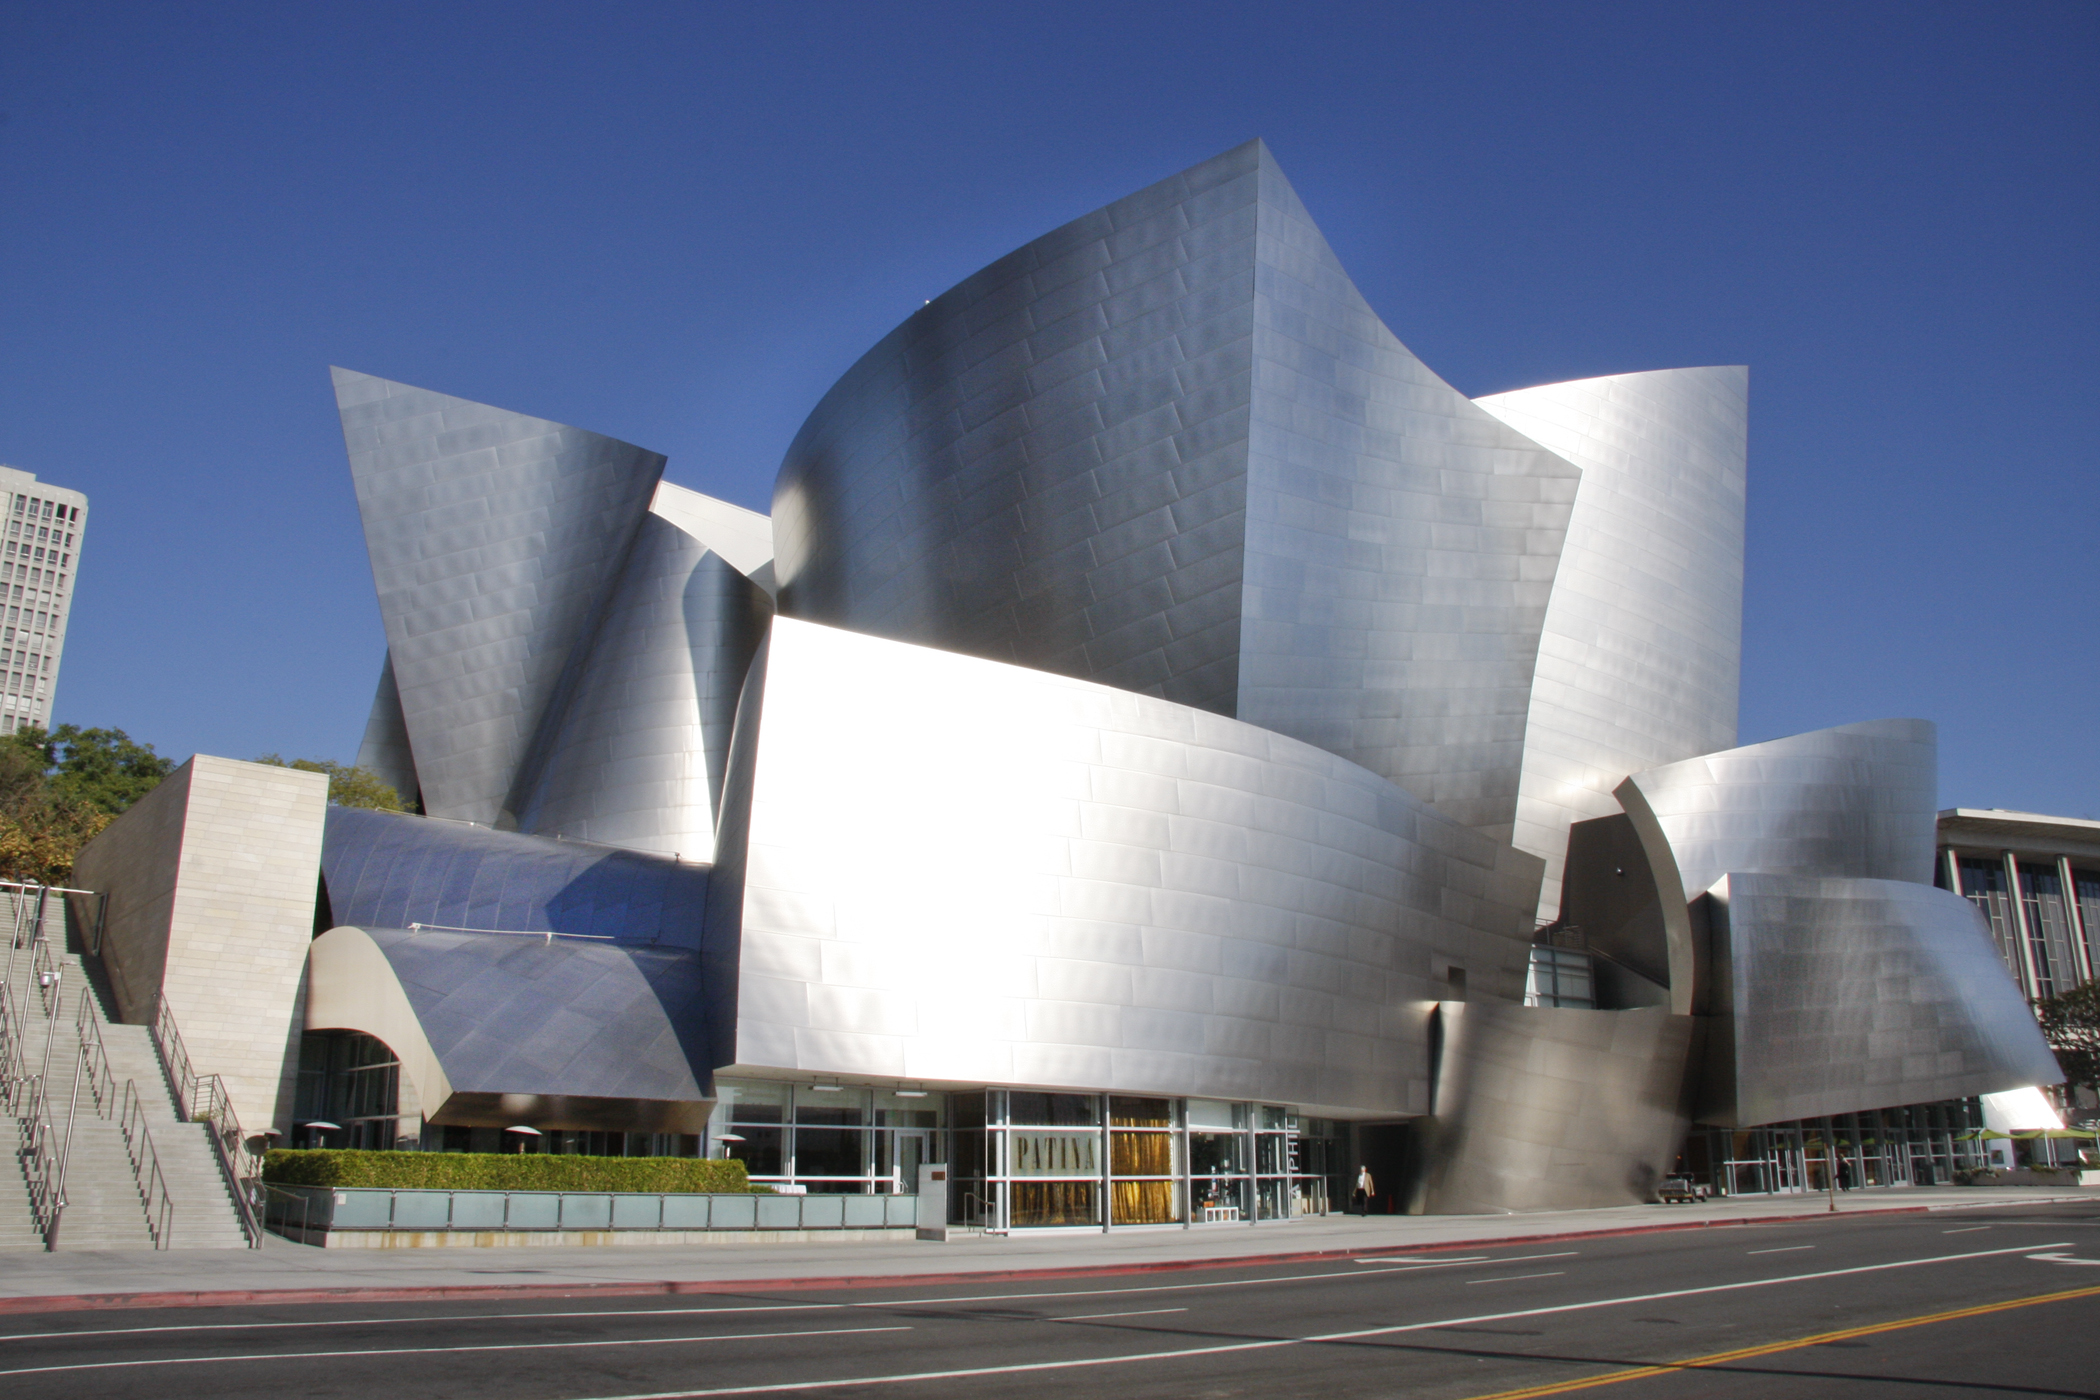 An exterior daytime shot of a gleaming wavy building with a music venue inside.